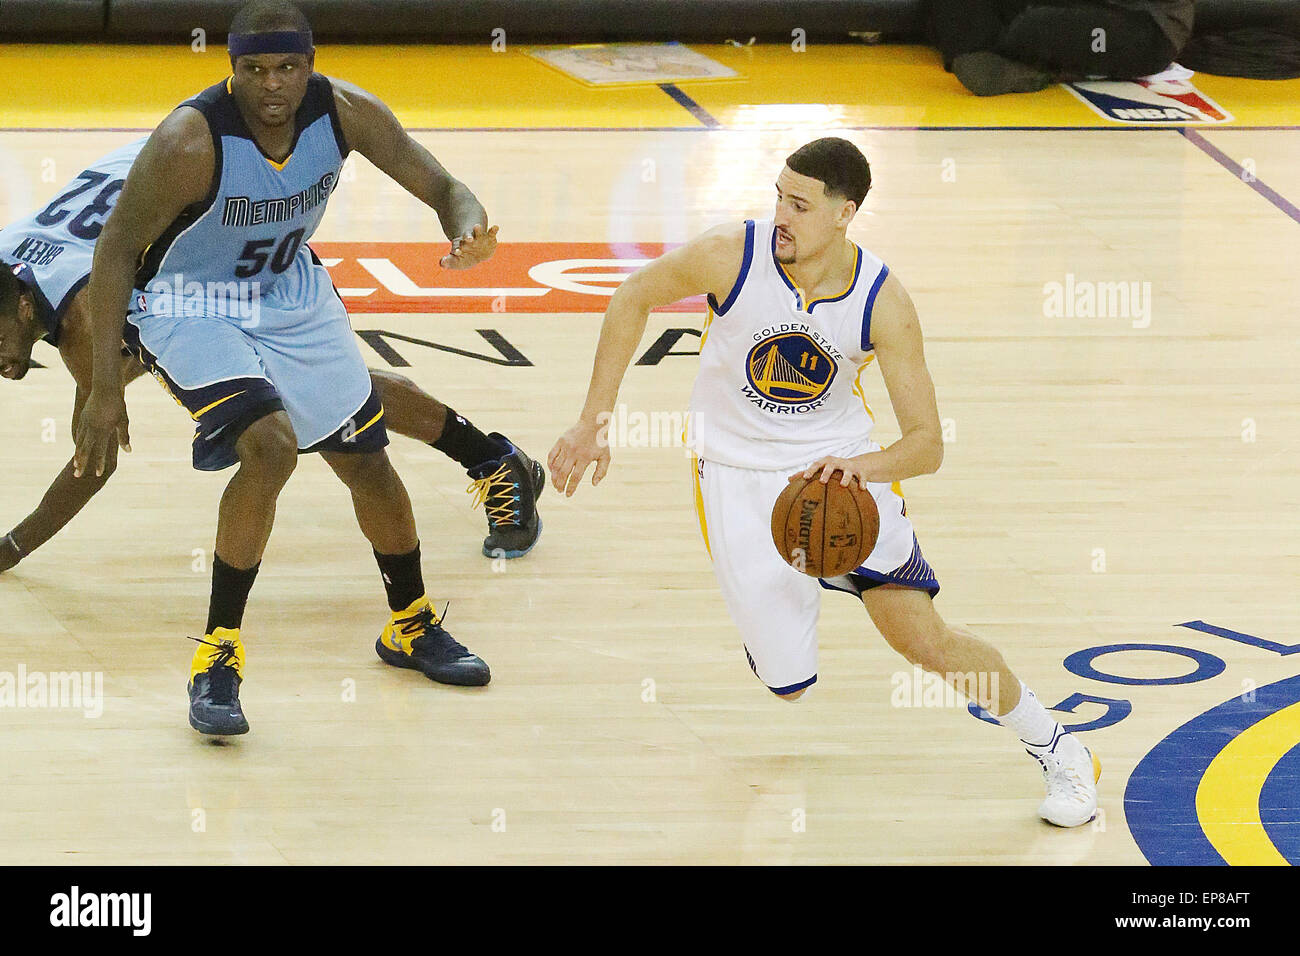 Napa, CA, USA. 14th May, 2015. The Golden State Warriors Klay Thompson drives past Zach Randolph and Jeff Green during their 98-78 victory over the Memphis Grizzlies at Oracle Arena in Oakland on Wednesday. The Warriors lead the series 3 games to 2. Credit:  Napa Valley Register/ZUMA Wire/Alamy Live News Stock Photo